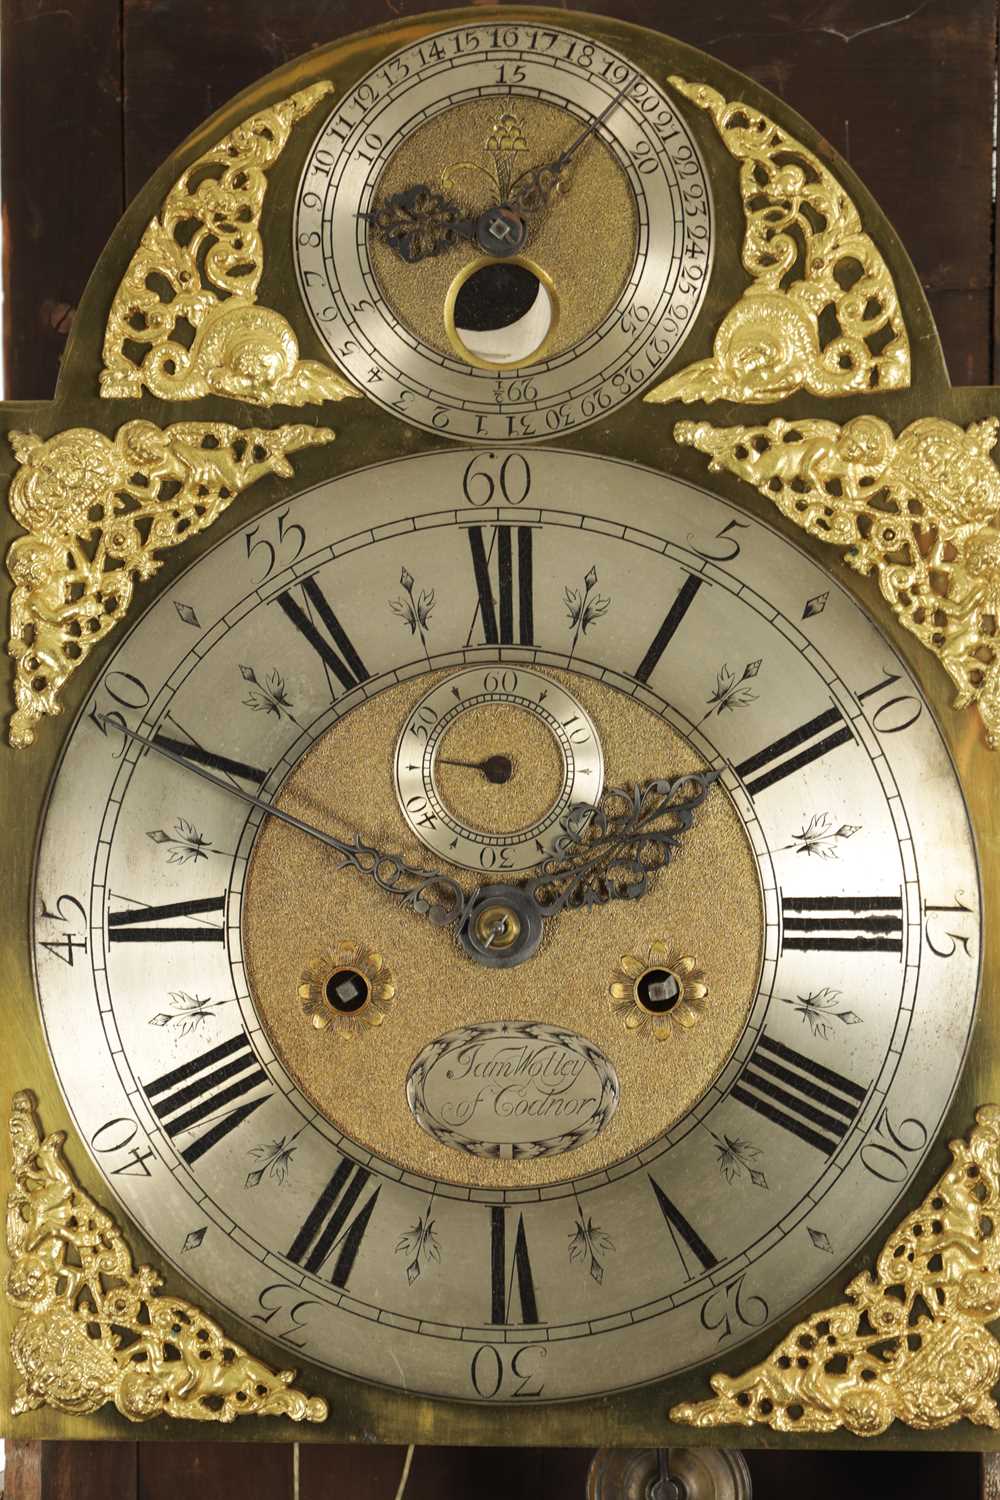 JAMES WOLLEY (WOOLLEY), CODNOR. AN EARLY 18TH CENTURY EIGHT DAY LONGCASE CLOCK WITH MOONPHASE - Image 4 of 14